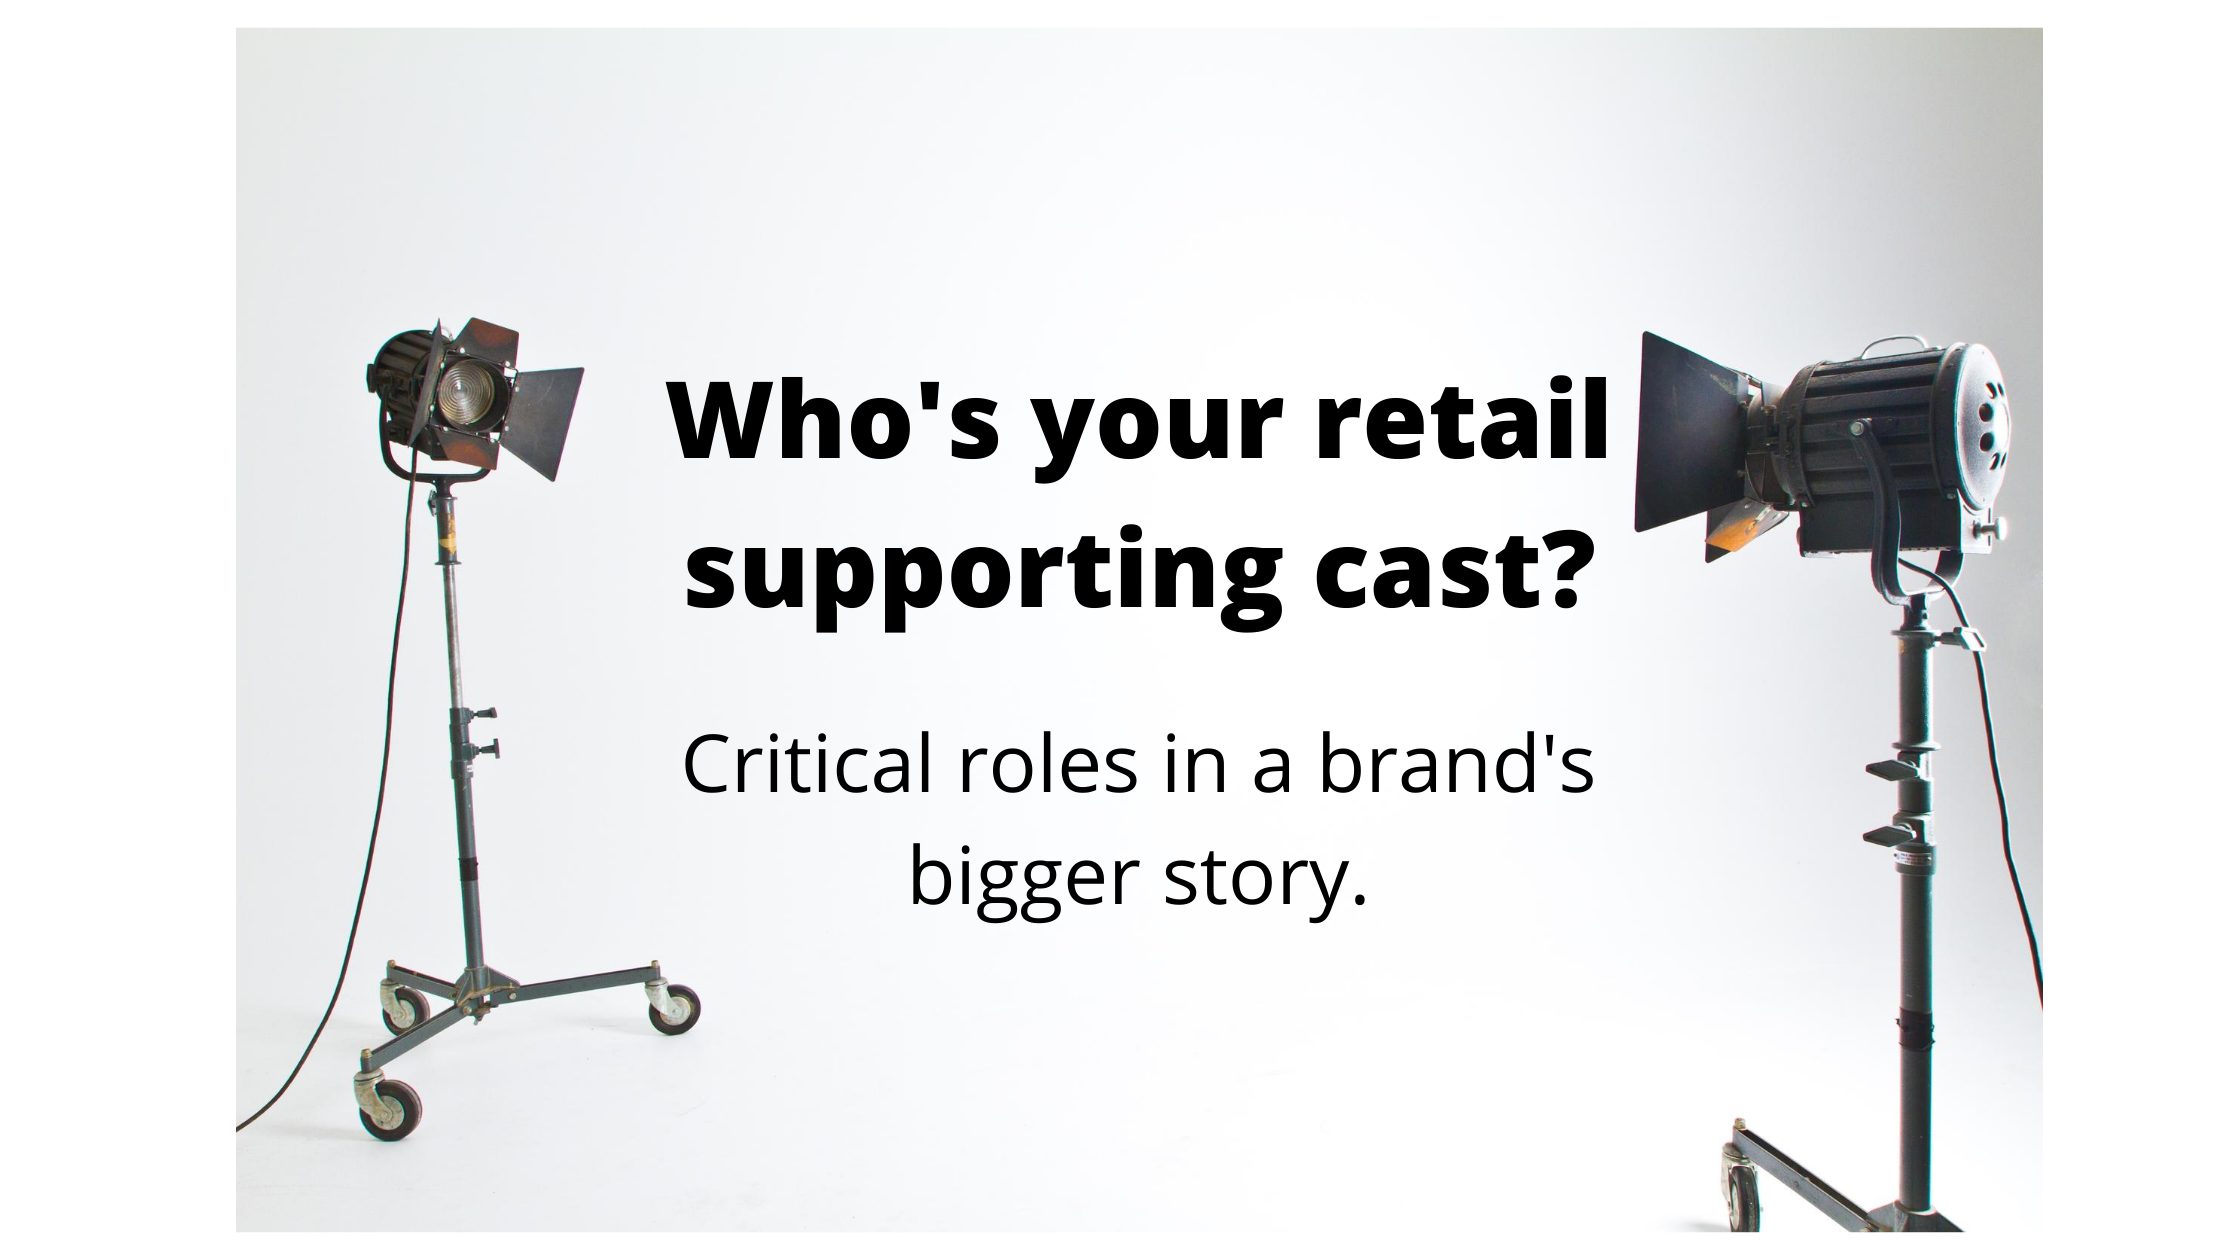 Who's your retail supporting cast?